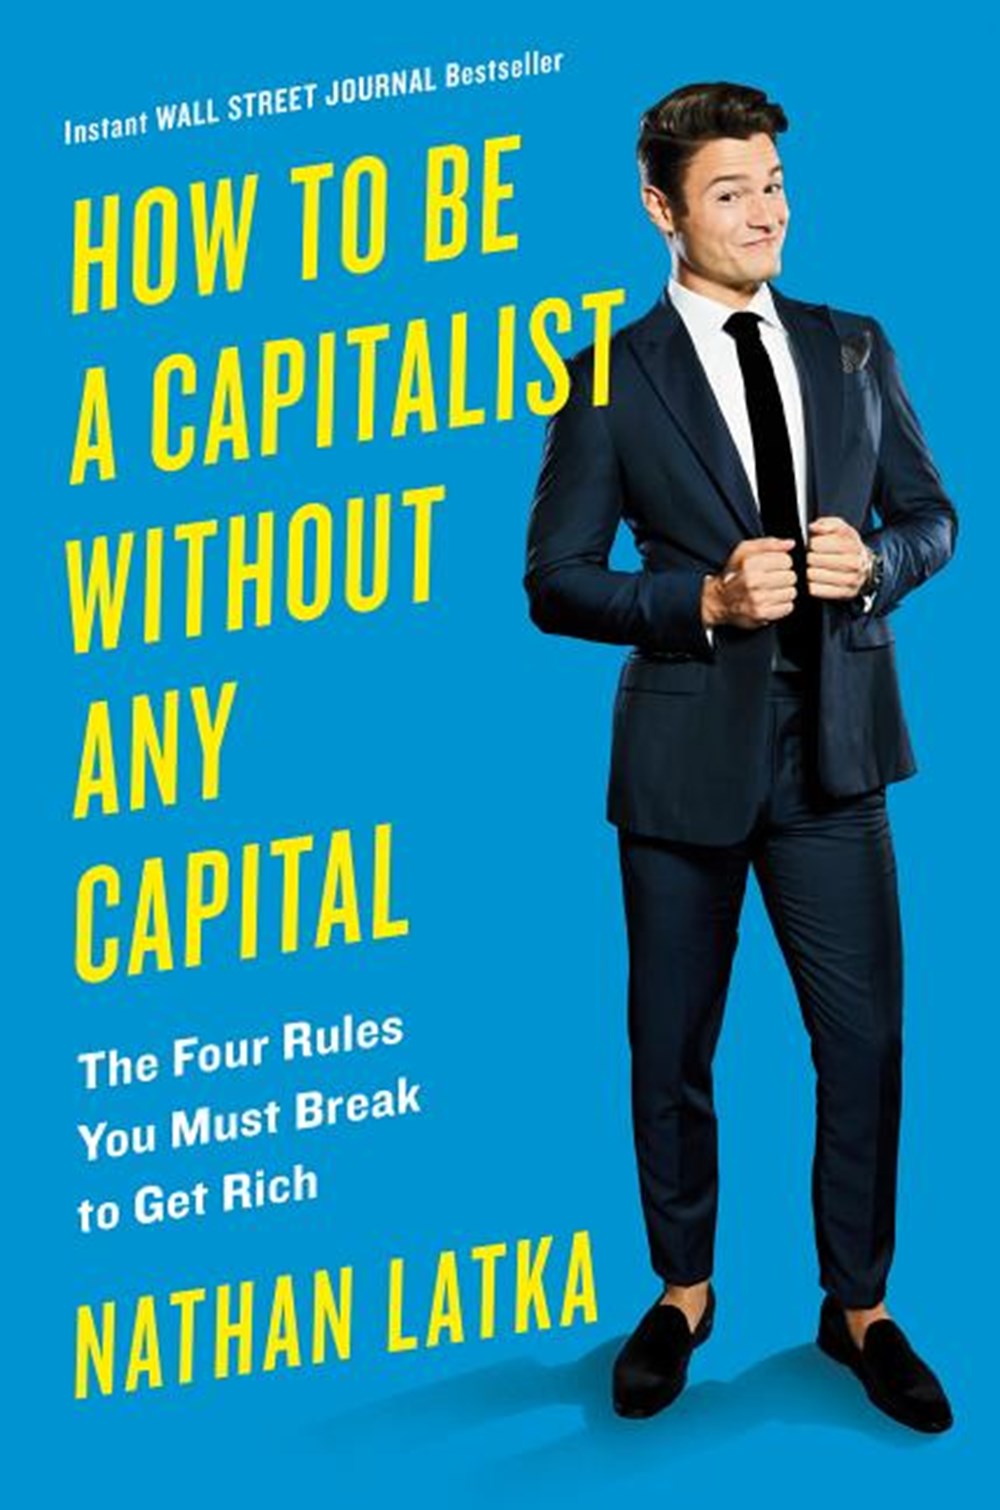 How to Be a Capitalist Without Any Capital The Four Rules You Must Break to Get Rich